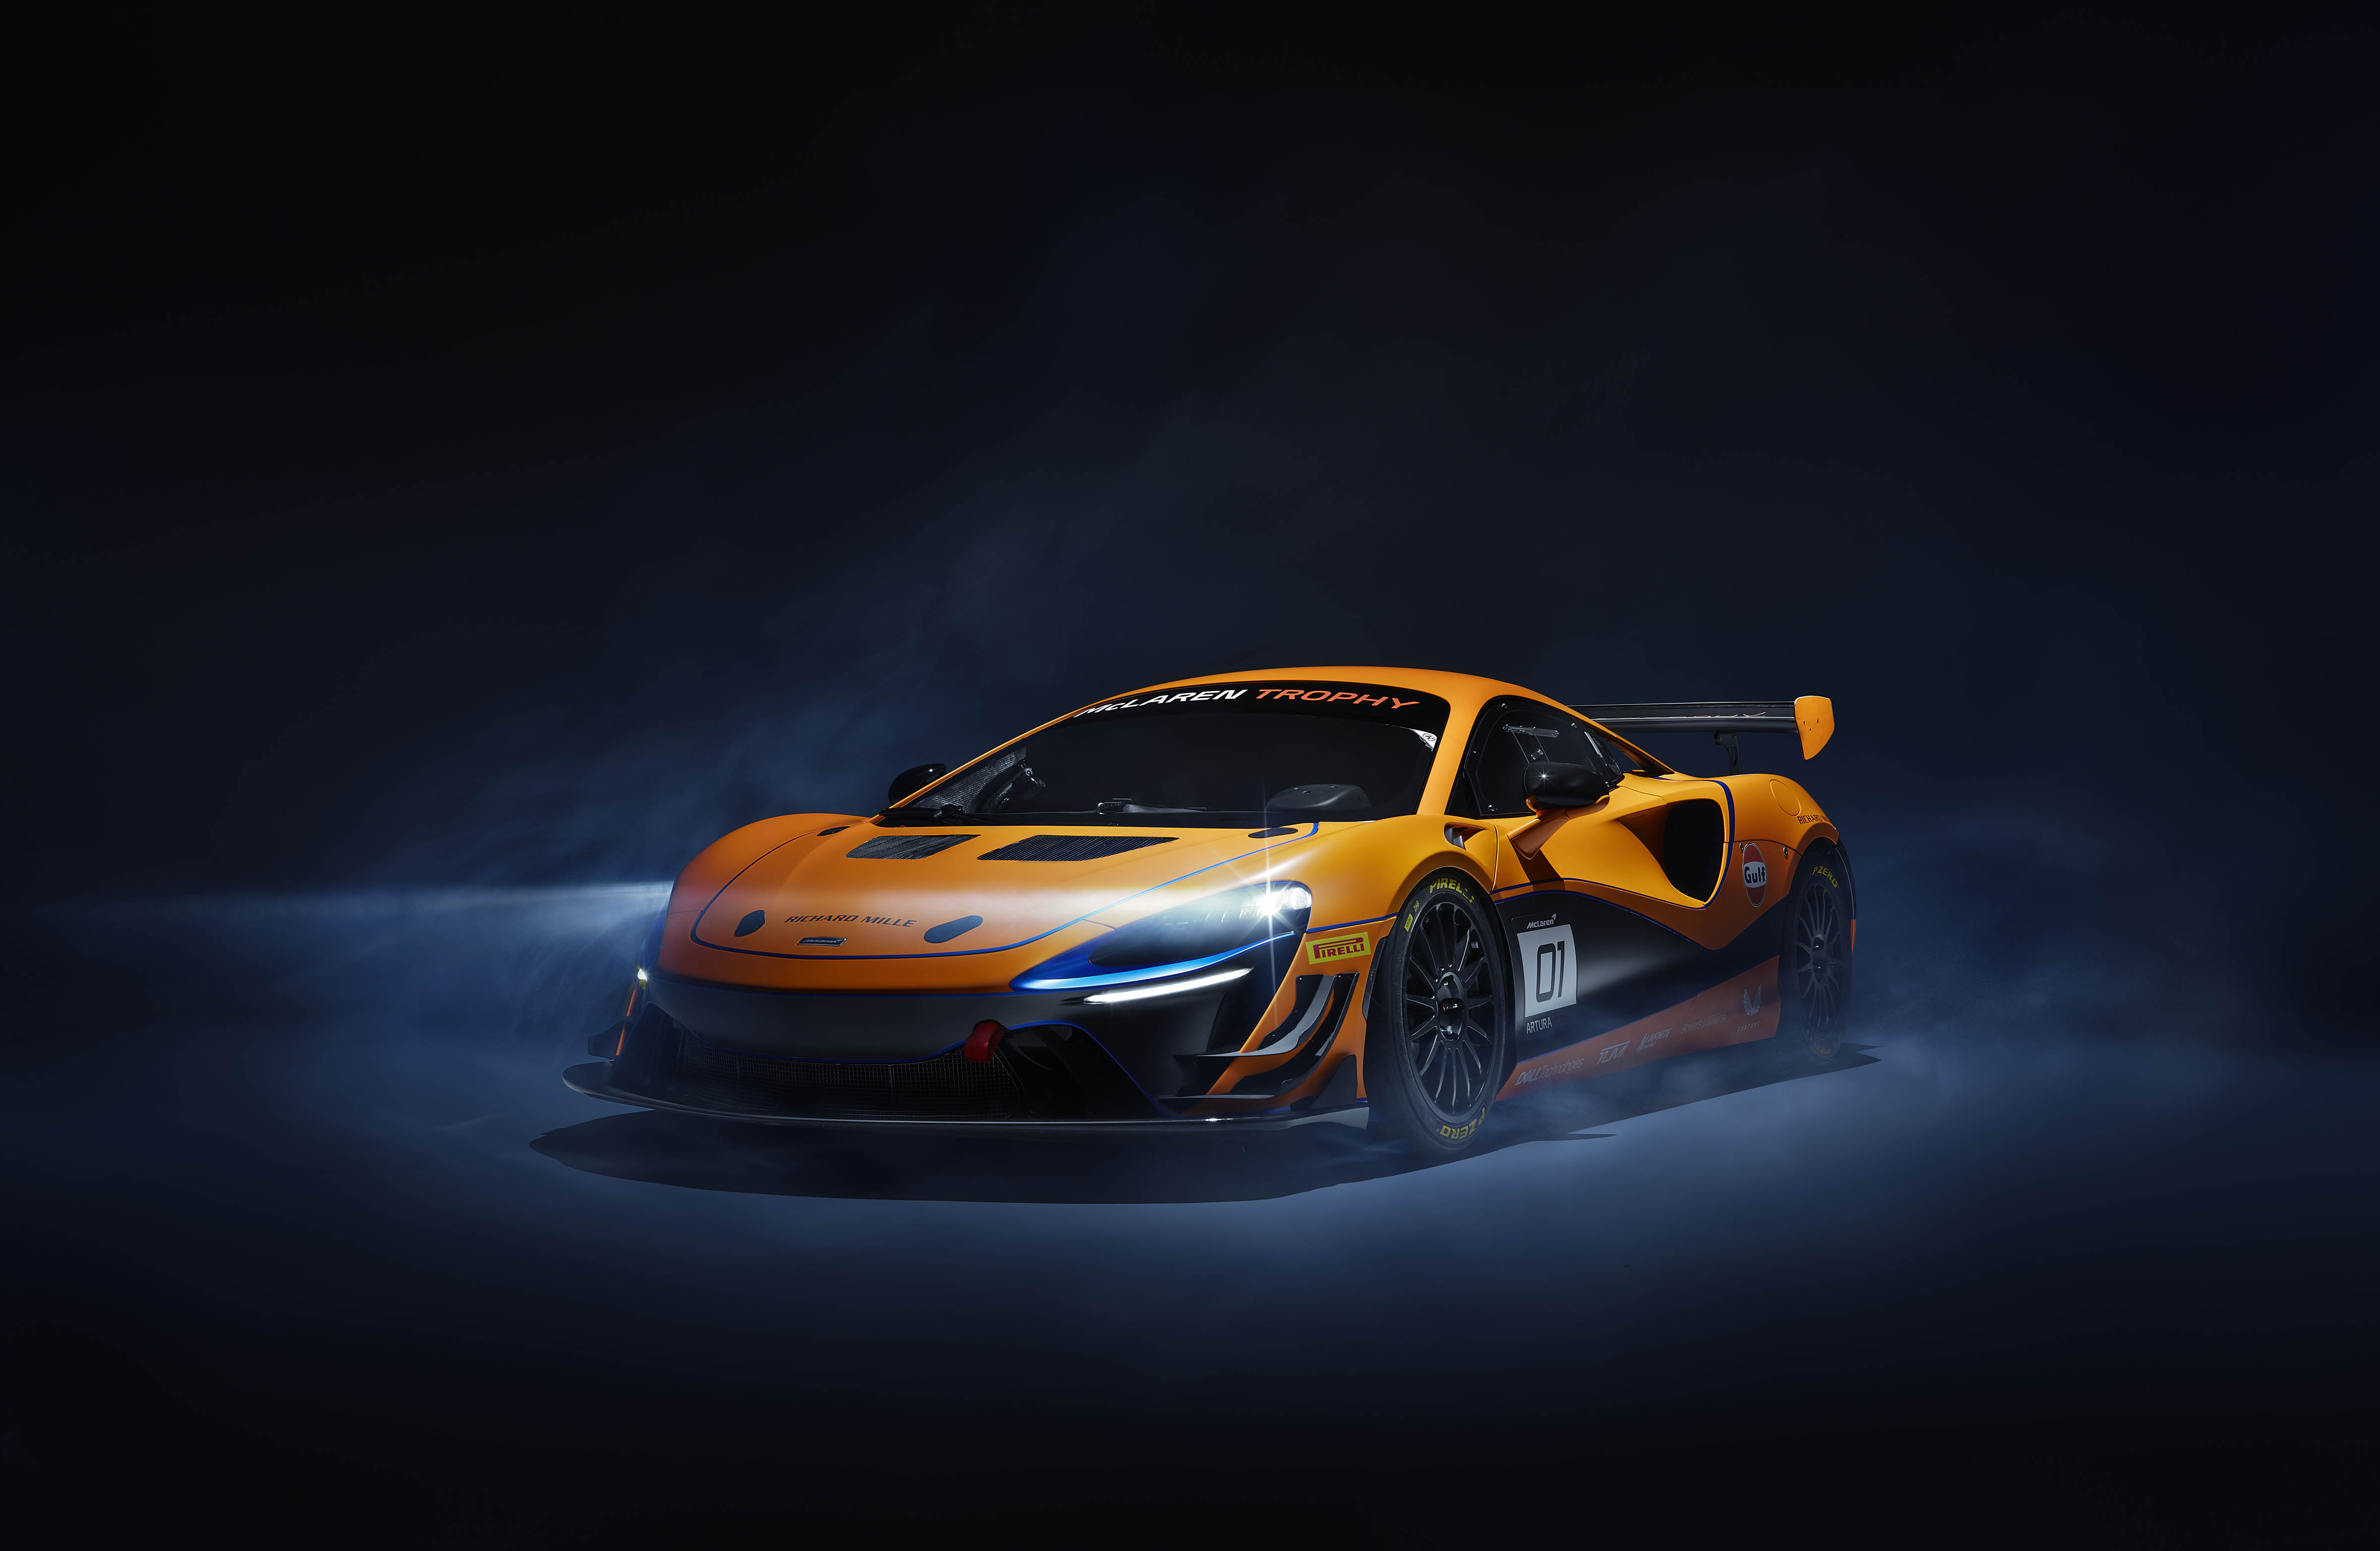 New Pro-Am McLaren Trophy championship to feature bespoke Artura race car at Fanatec GT World Challenge Europe powered by AWS events in 2023 Fanatec GT World Challenge Europe Powered by AWS